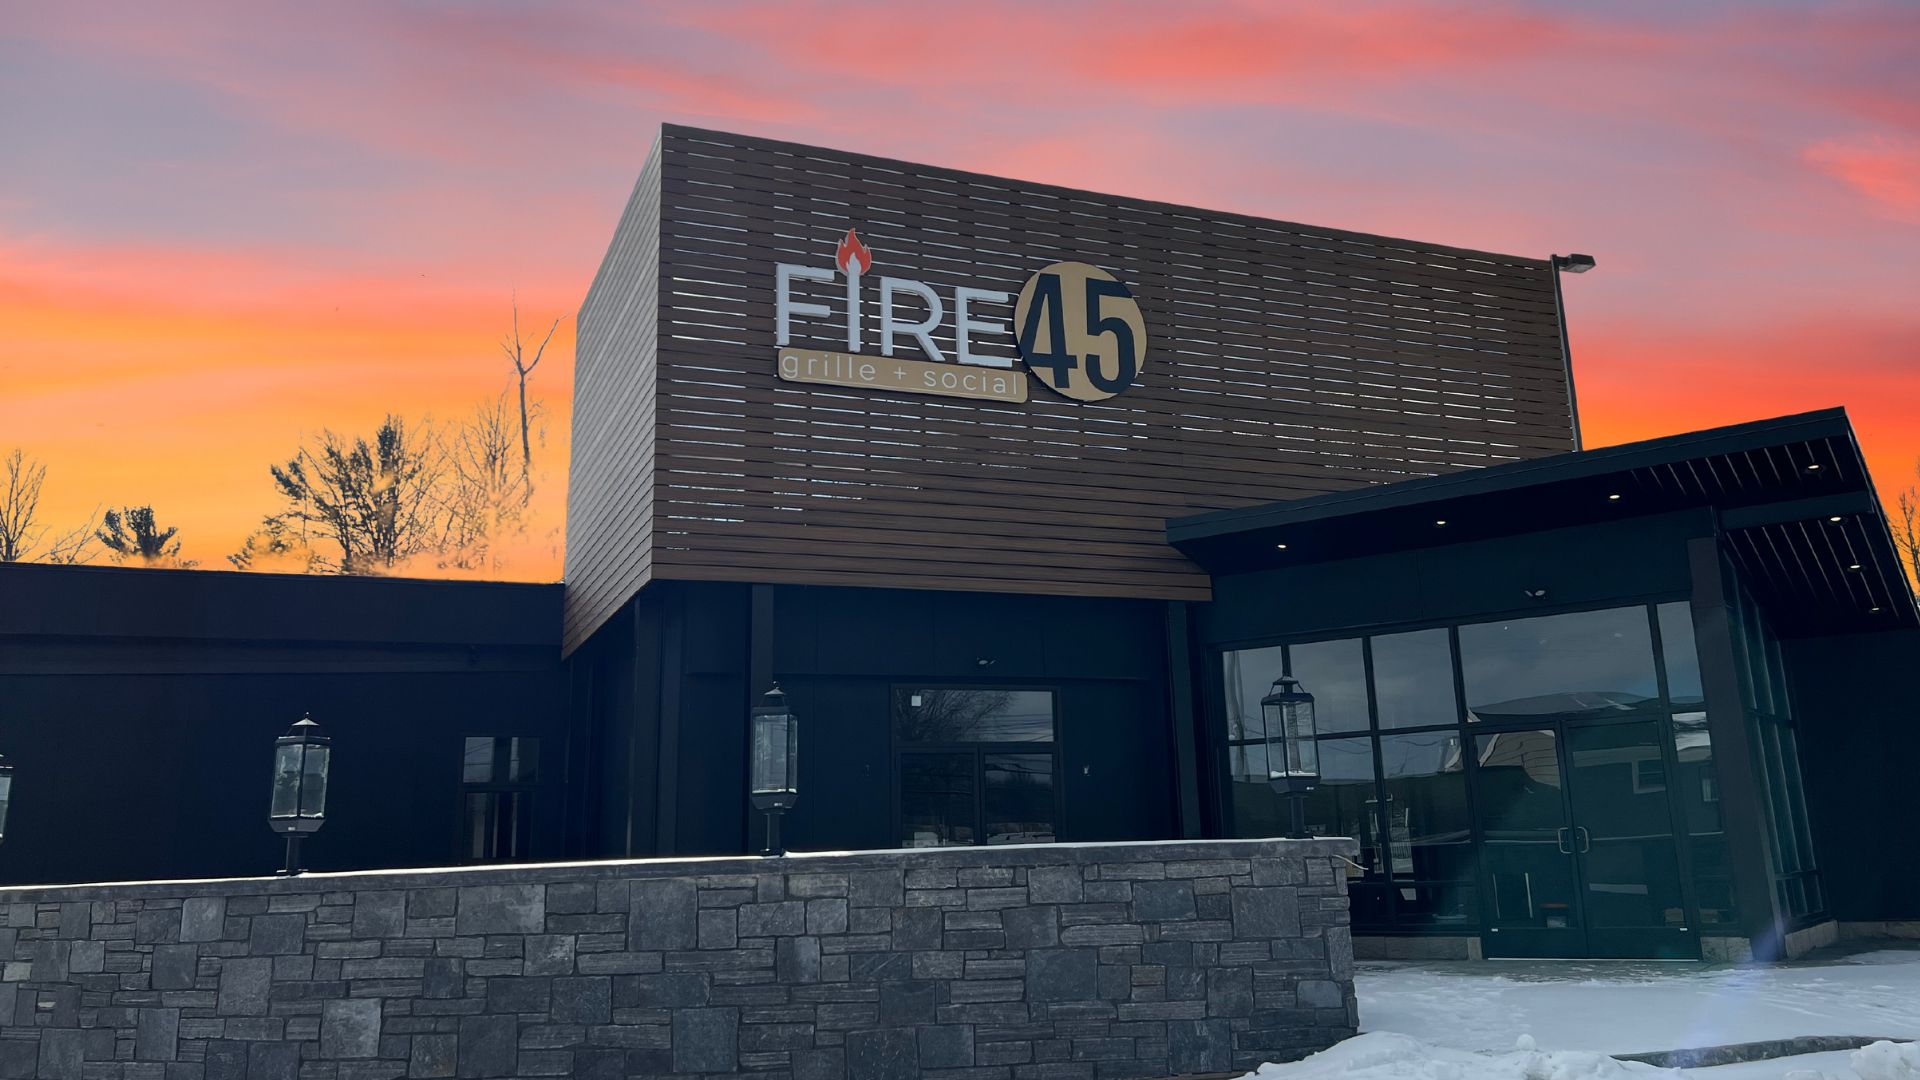 FIRE 45  GRILLE + SOCIAL